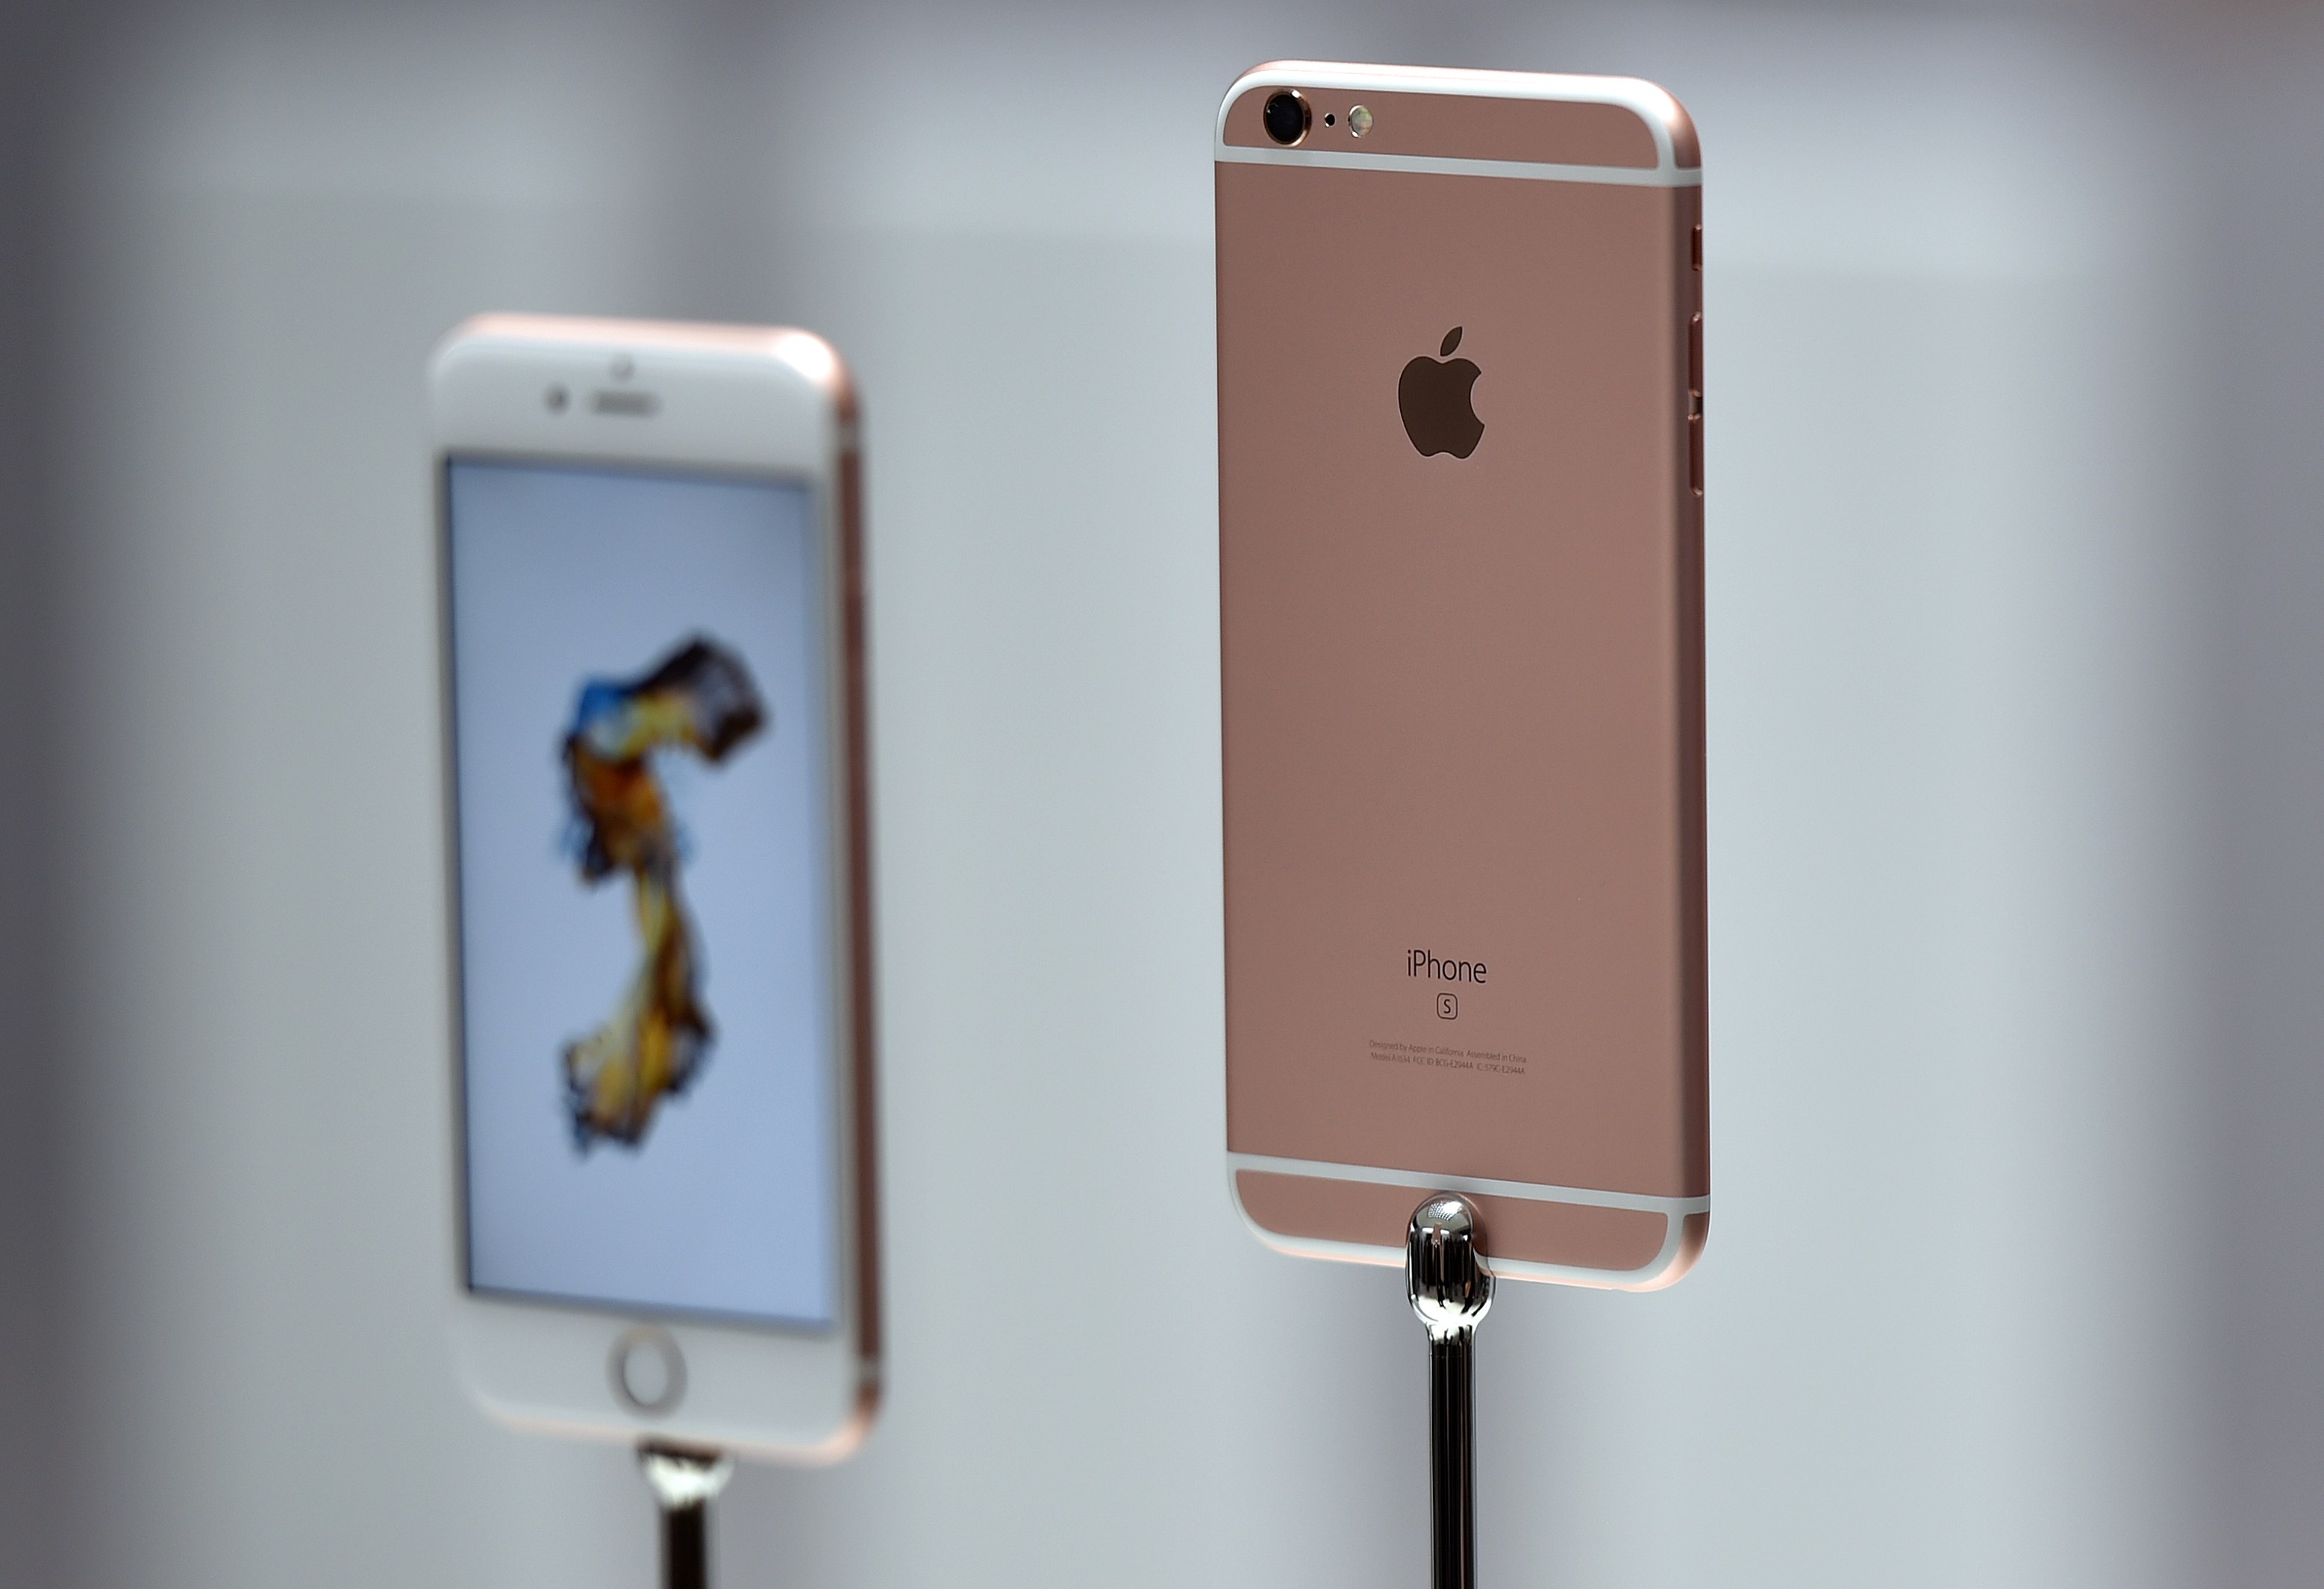 New models of the iPhone 6s are seen displayed during an Apple media event in San Francisco, California on September 9, 2015.